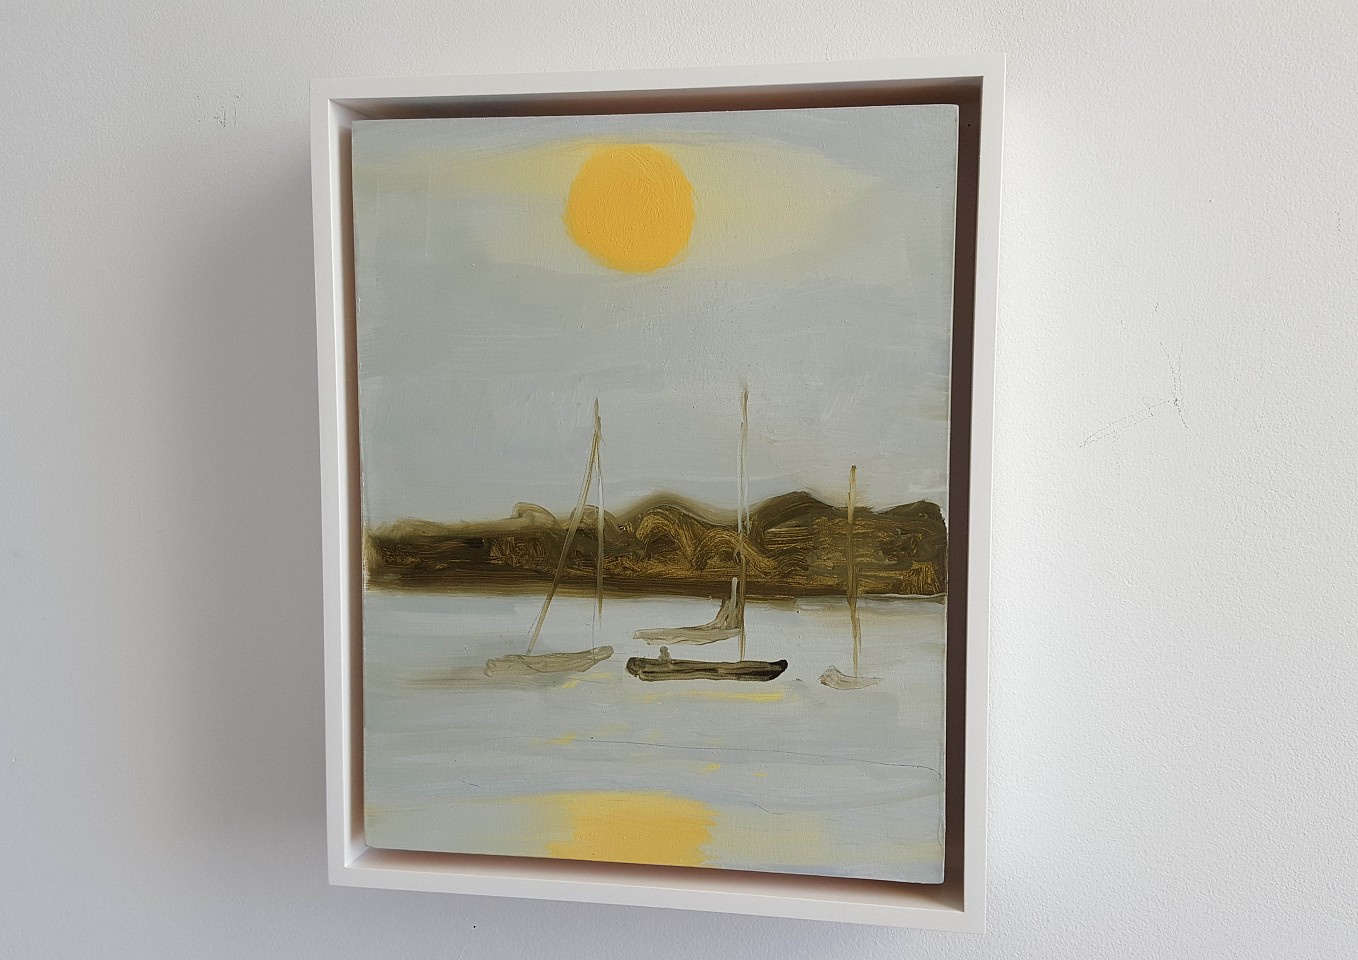 Kathryn Lynch
3 Boats and Sun, 2015
lyn605
oil on panel, 10 x 8 inches